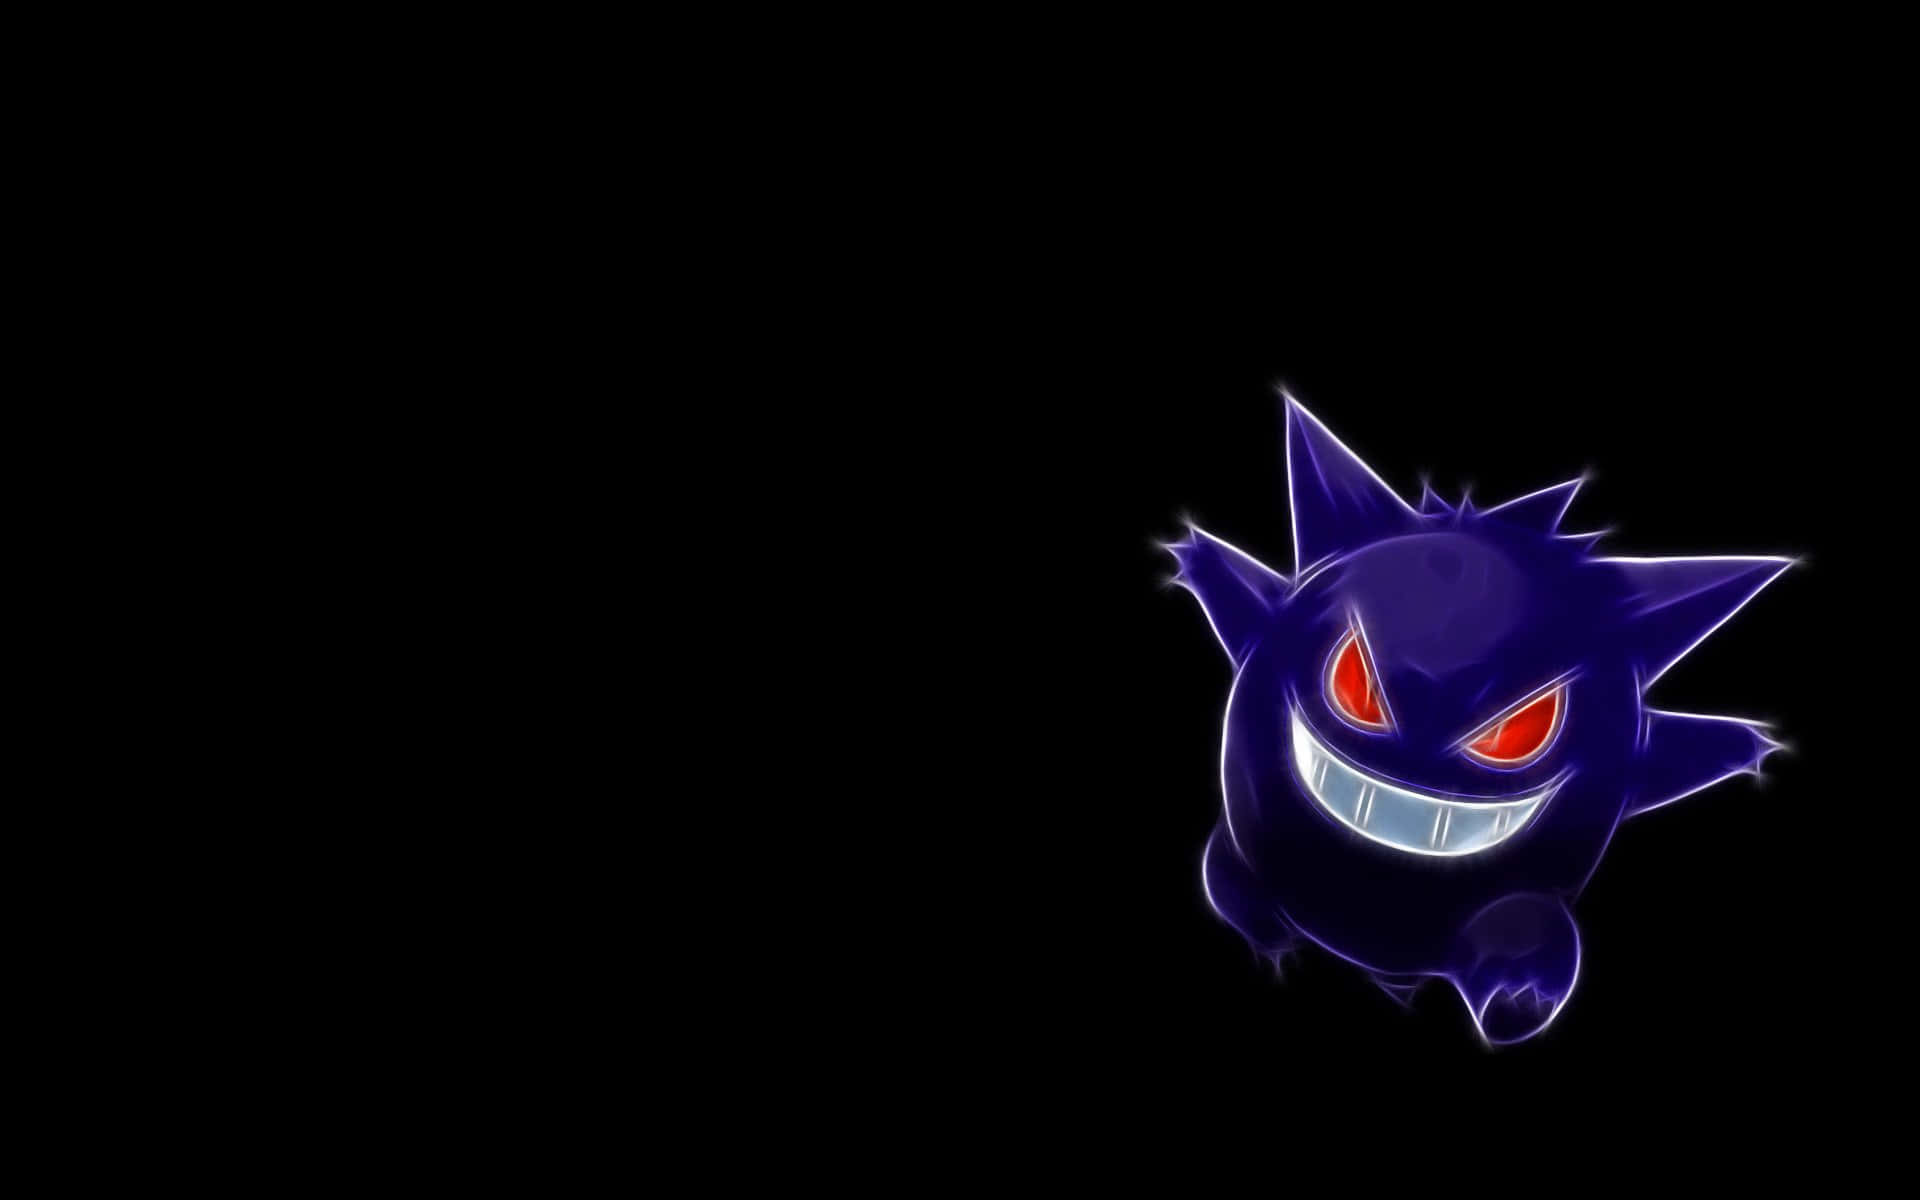 A Gengar appears in a dark alley, ready to challenge its challenger.